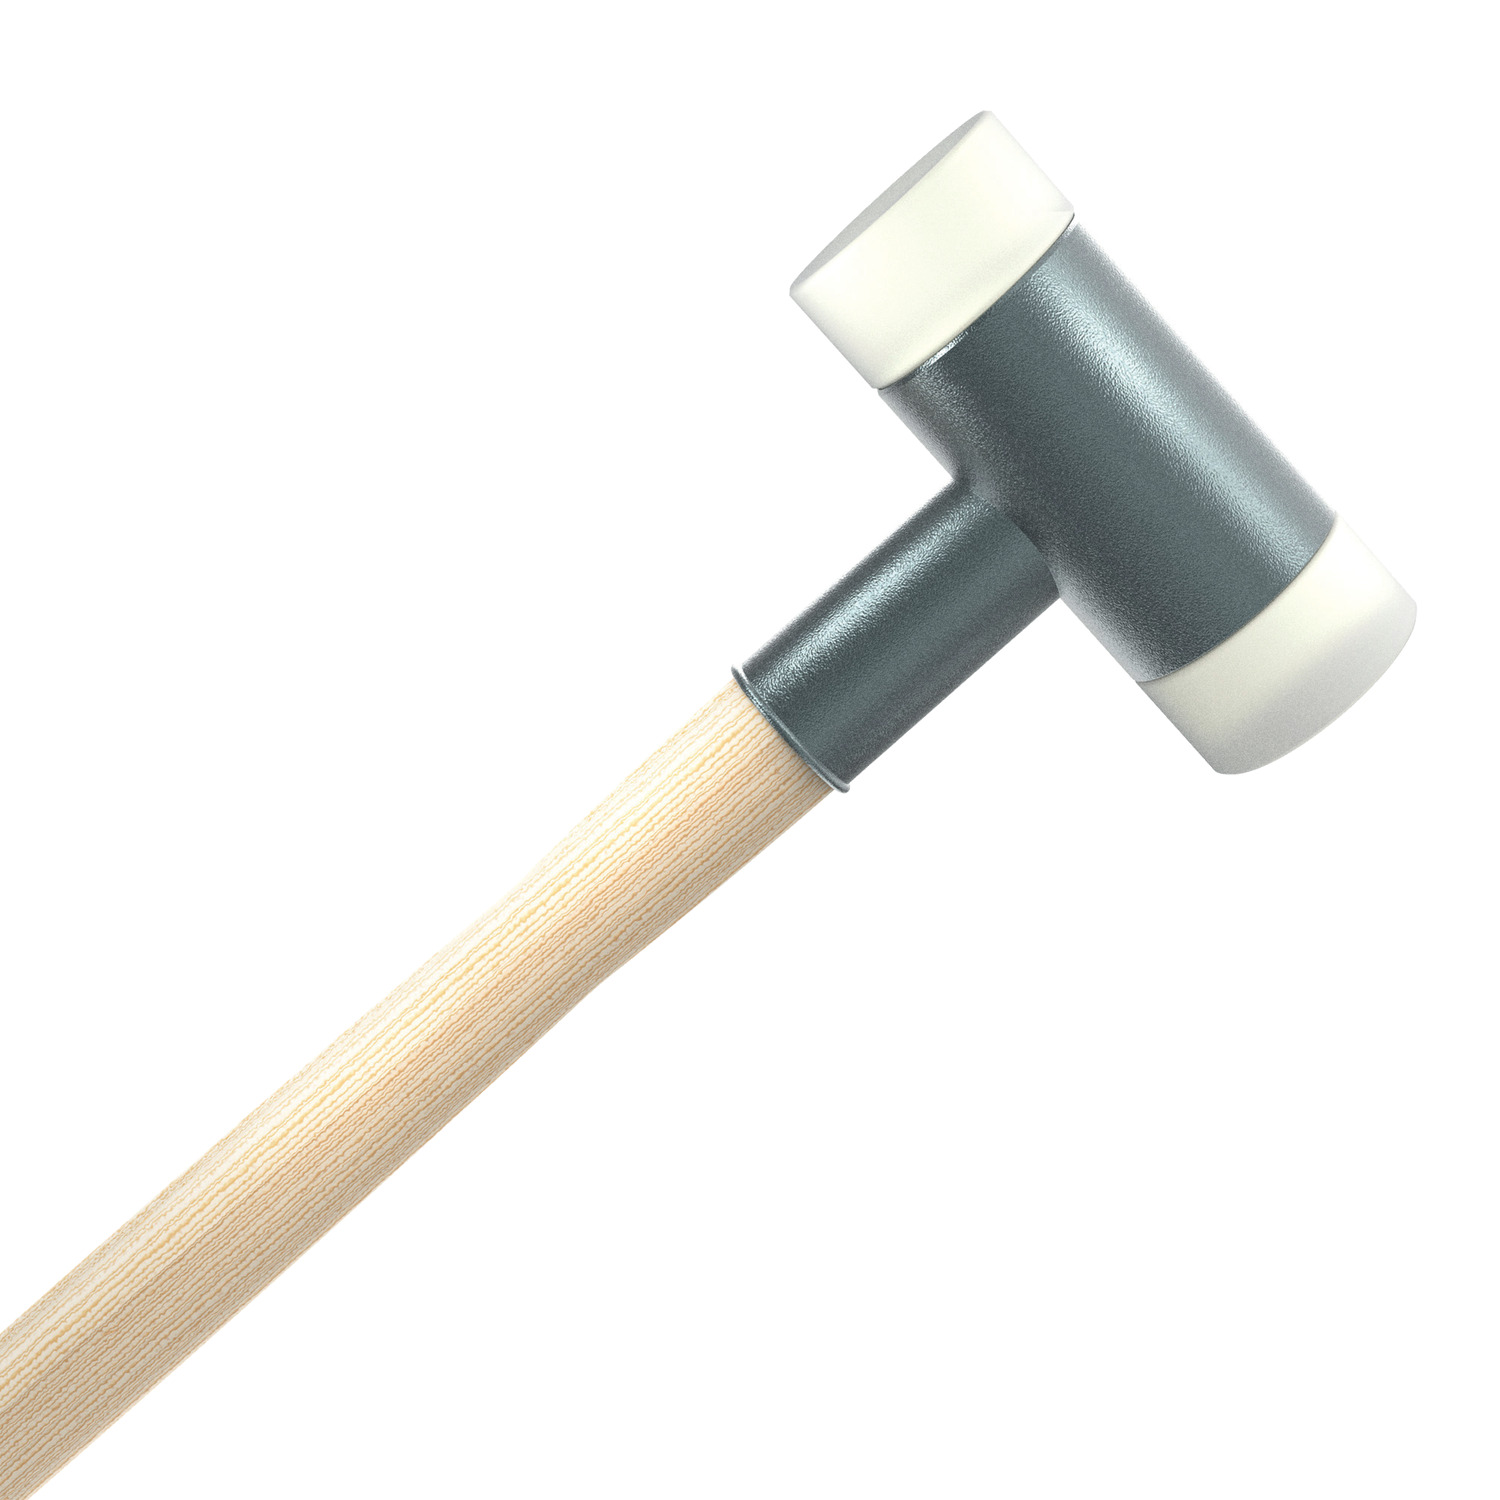 Product 98361, Non-Rebound Sledge Hammer steel housing - wooden handle - complete / 